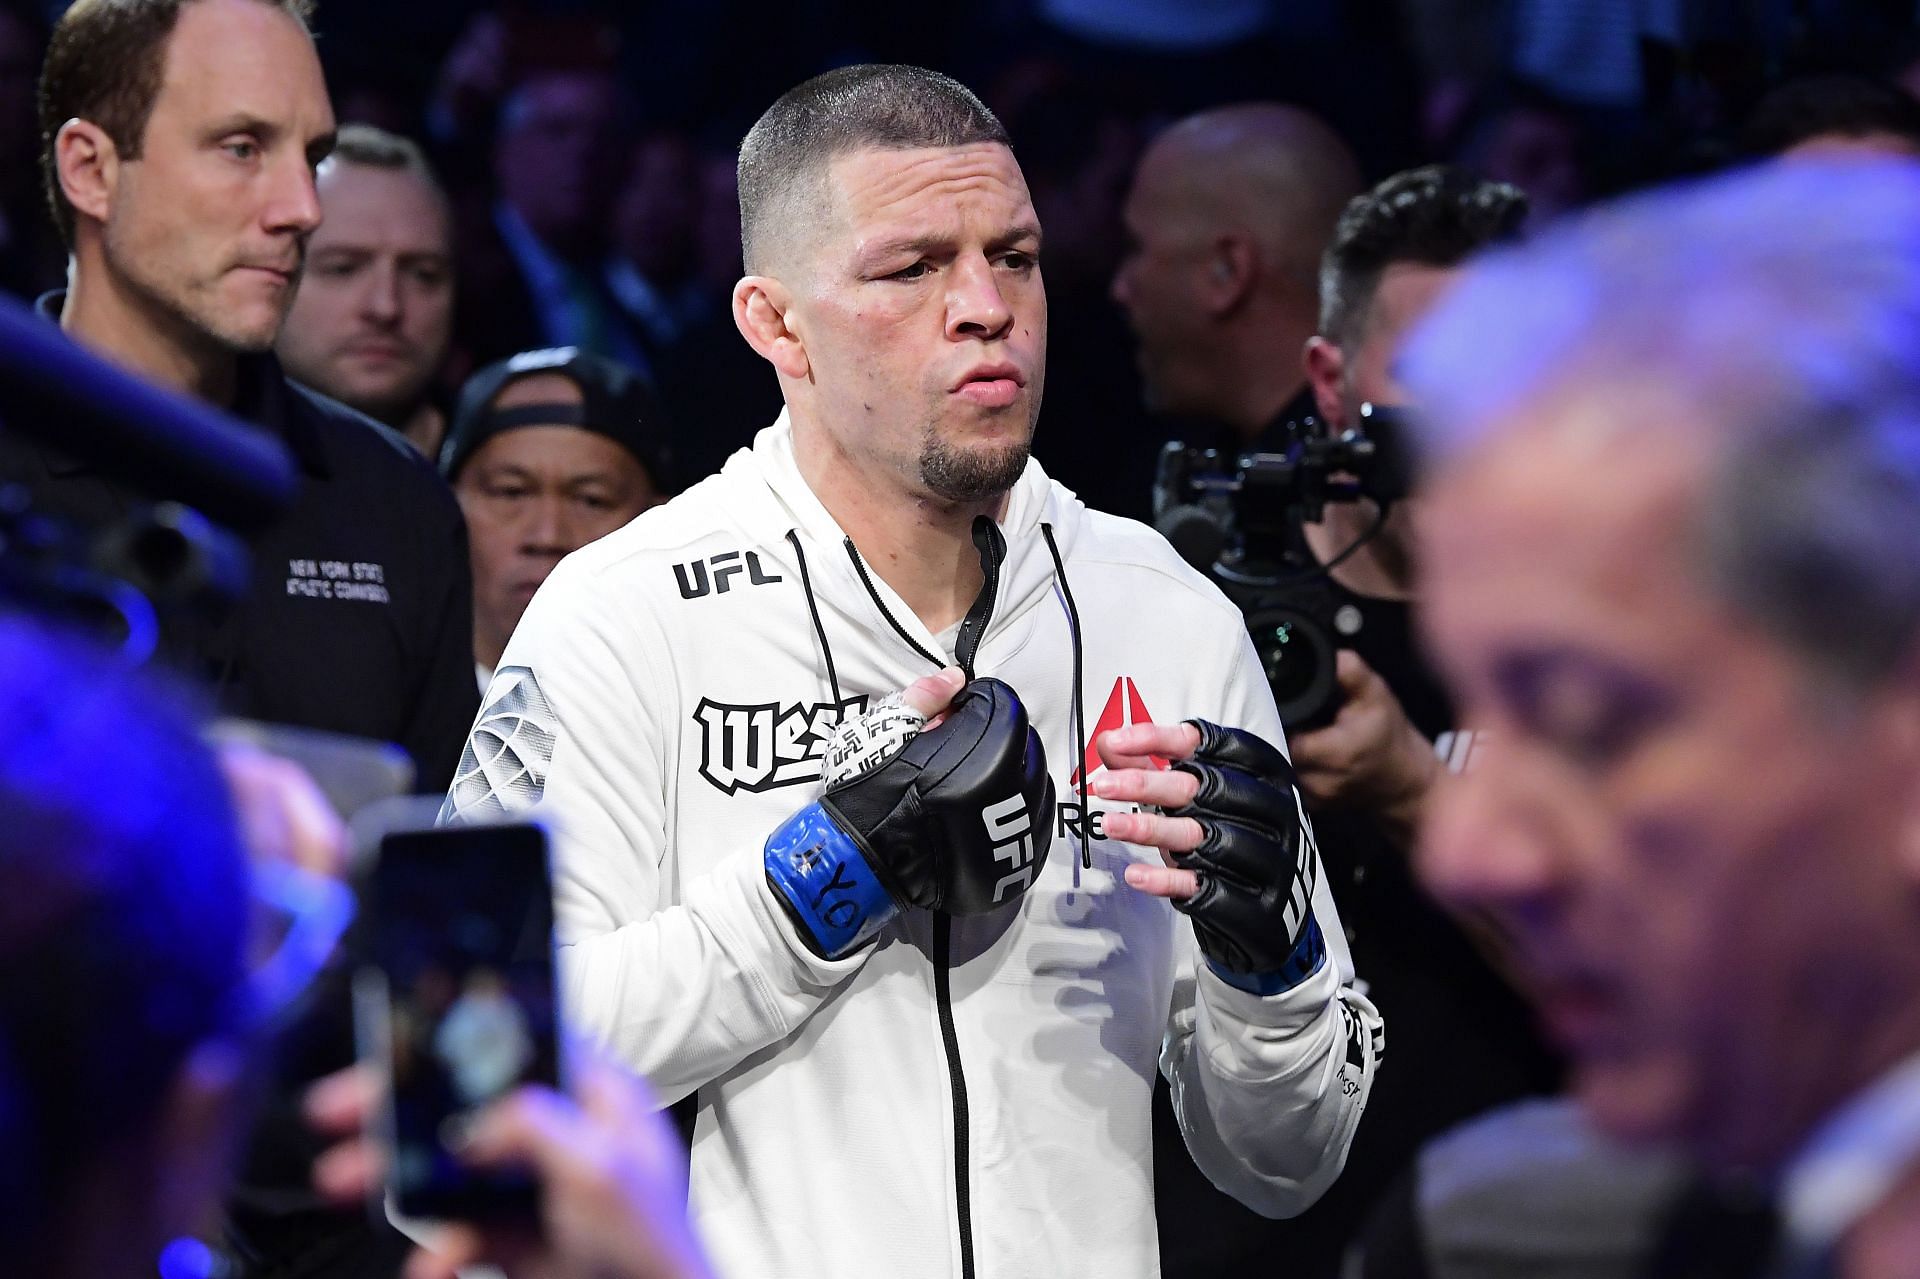 Nate Diaz&#039;s rant at Conor McGregor led to their now-legendary rivalry